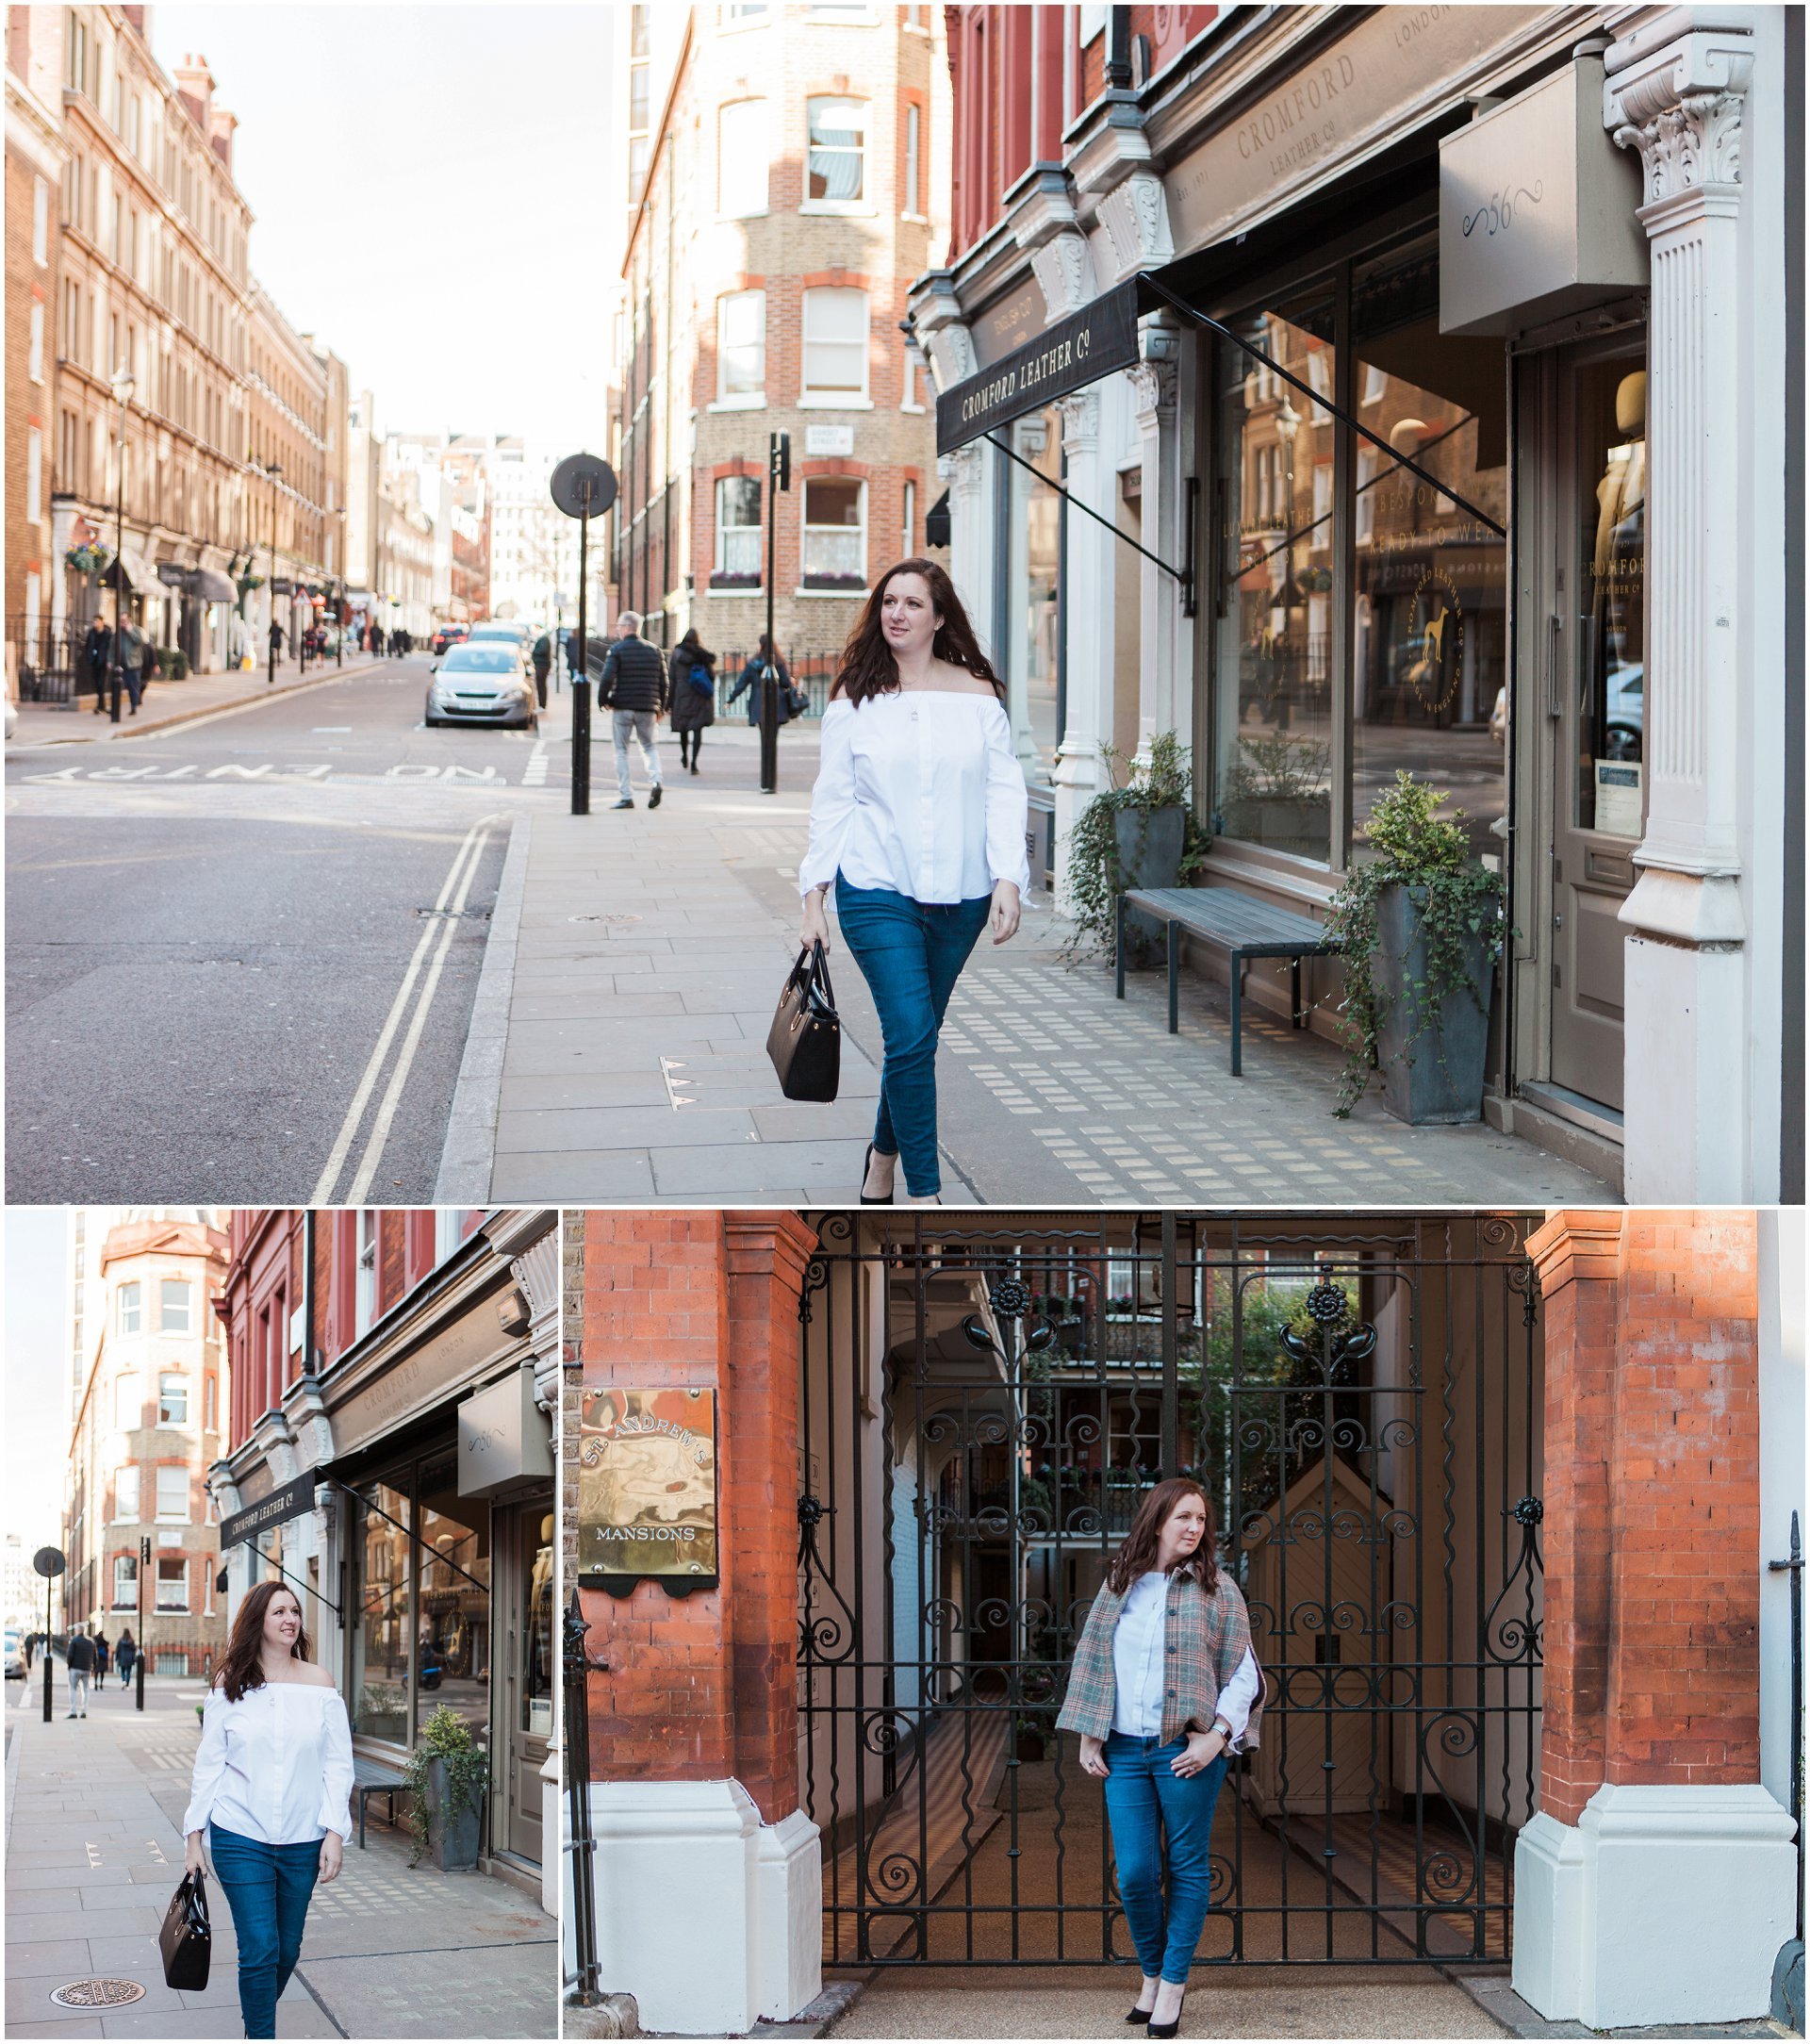 London brand portraits with Shelly Shulman Strategy. Images by London brand photographer AKP Branding Stories